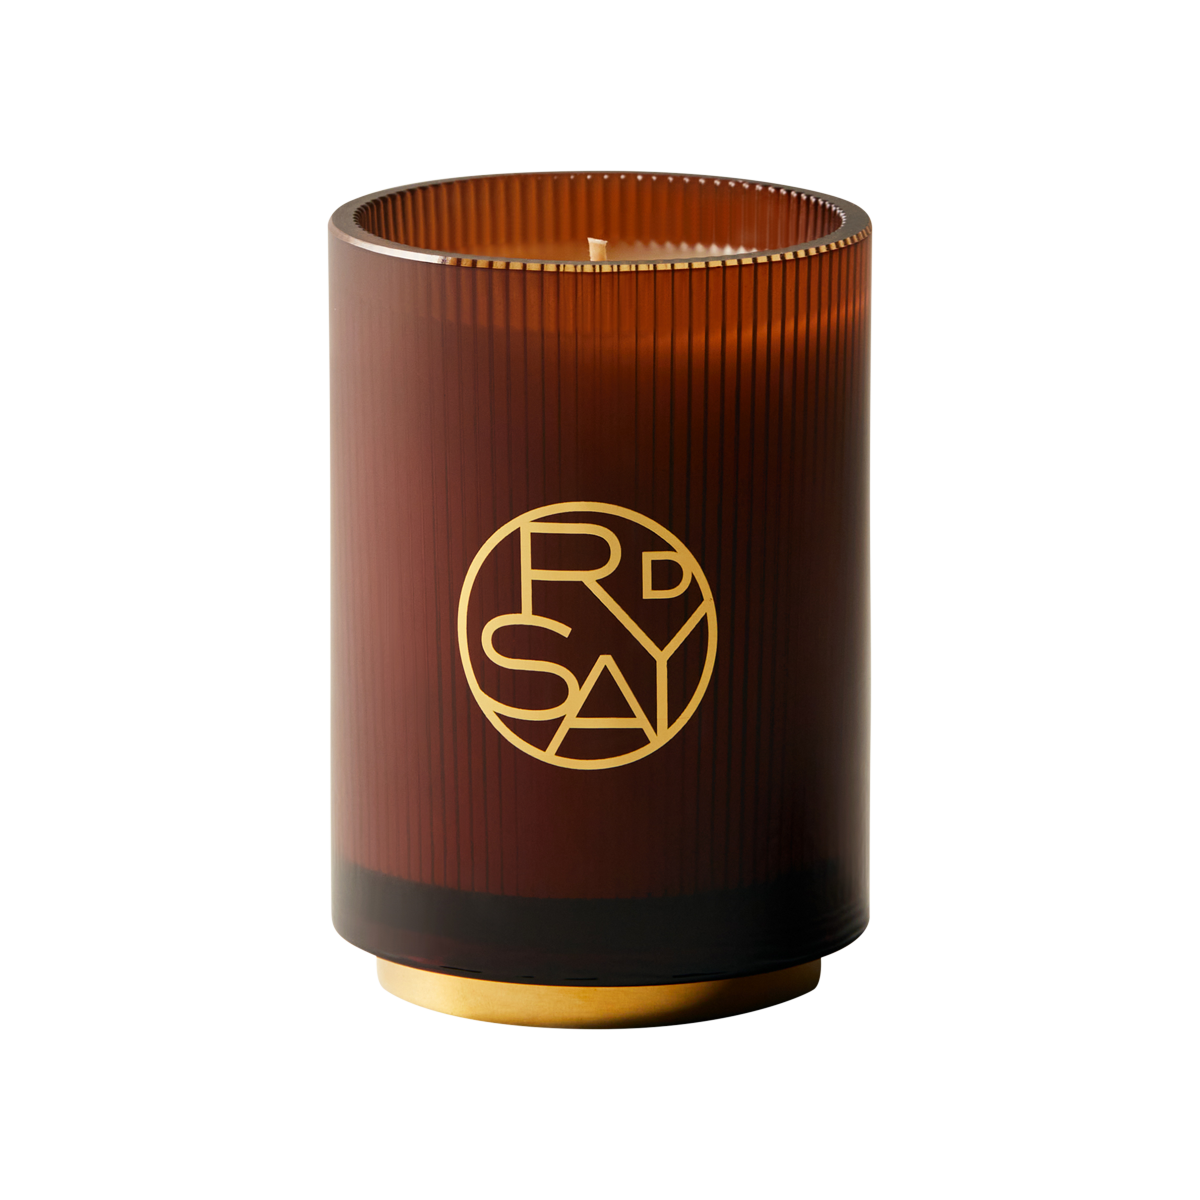 D'Orsay - Scented Candle 03:50